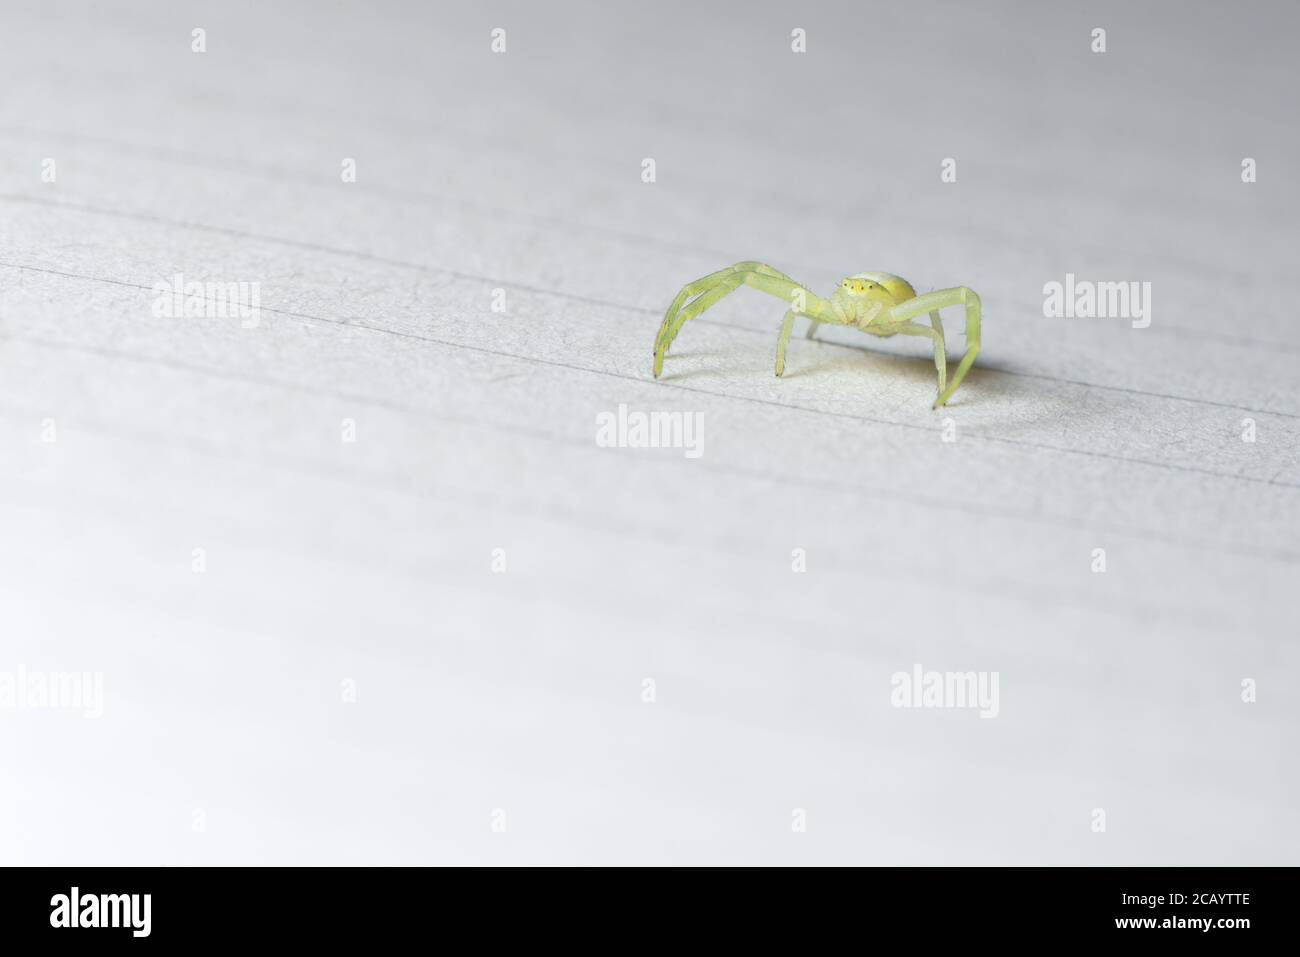 Face on low angle horizontal full body super macro image of a black footed yellow sack spider on lined paper indoors. Plenty of copy space. Stock Photo